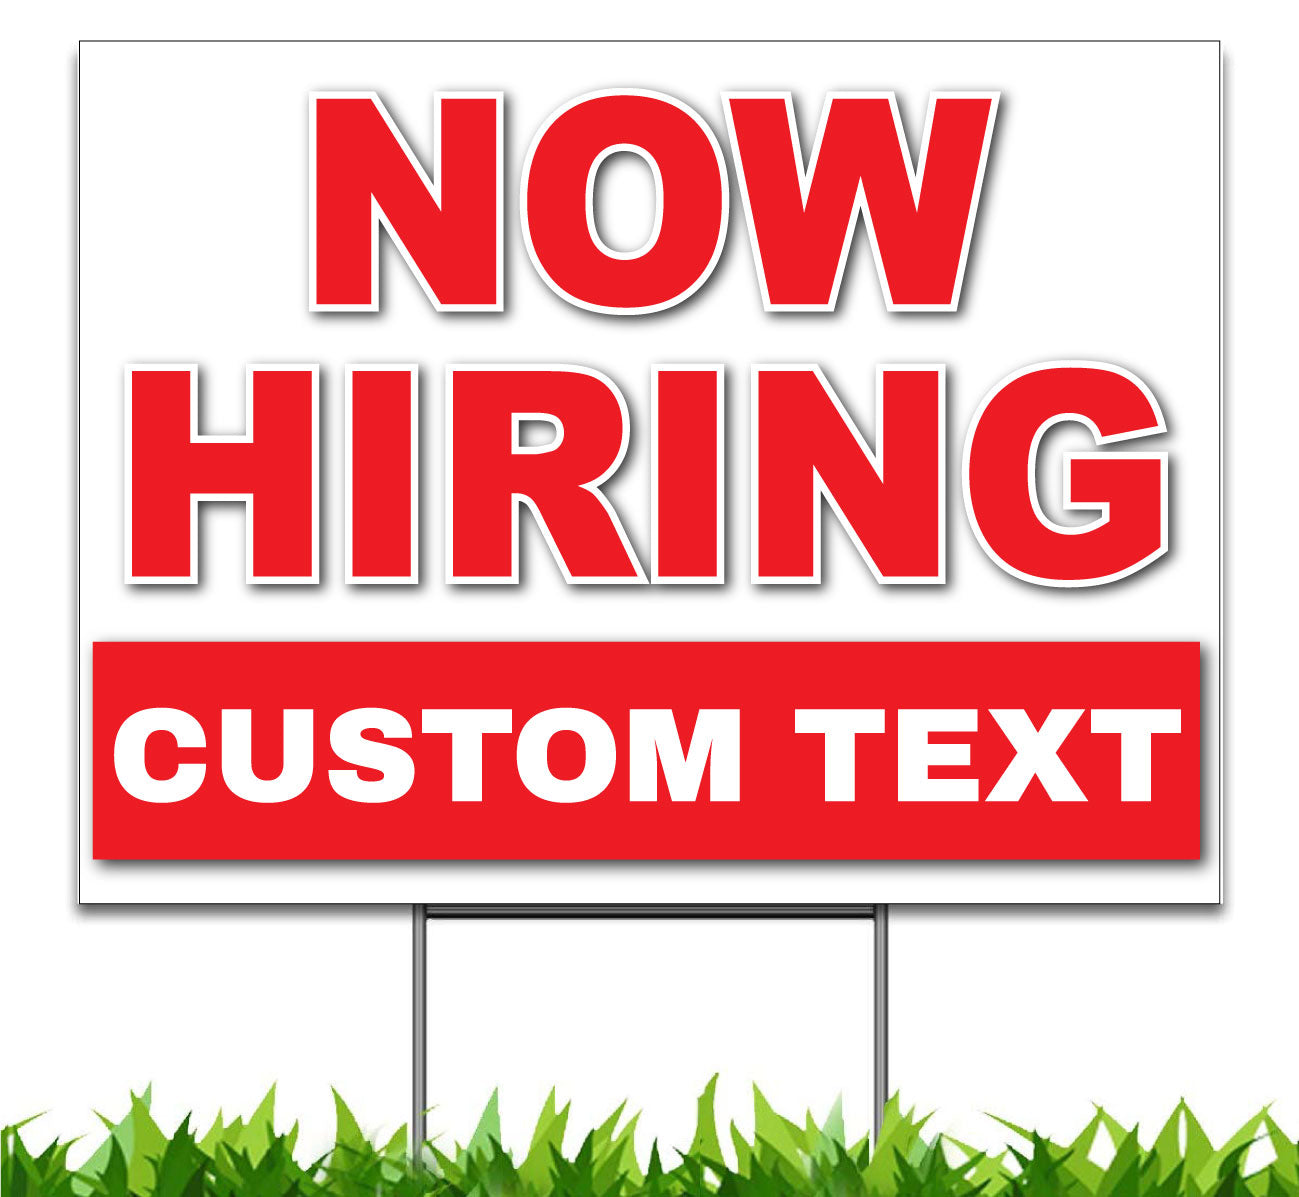 Custom Now Hiring Sign, 18 x 24 inch Yard Sign, Double Sided Print, Outdoor, Weatherproof Corrugated Plastic, Metal H-Stake Included, v3